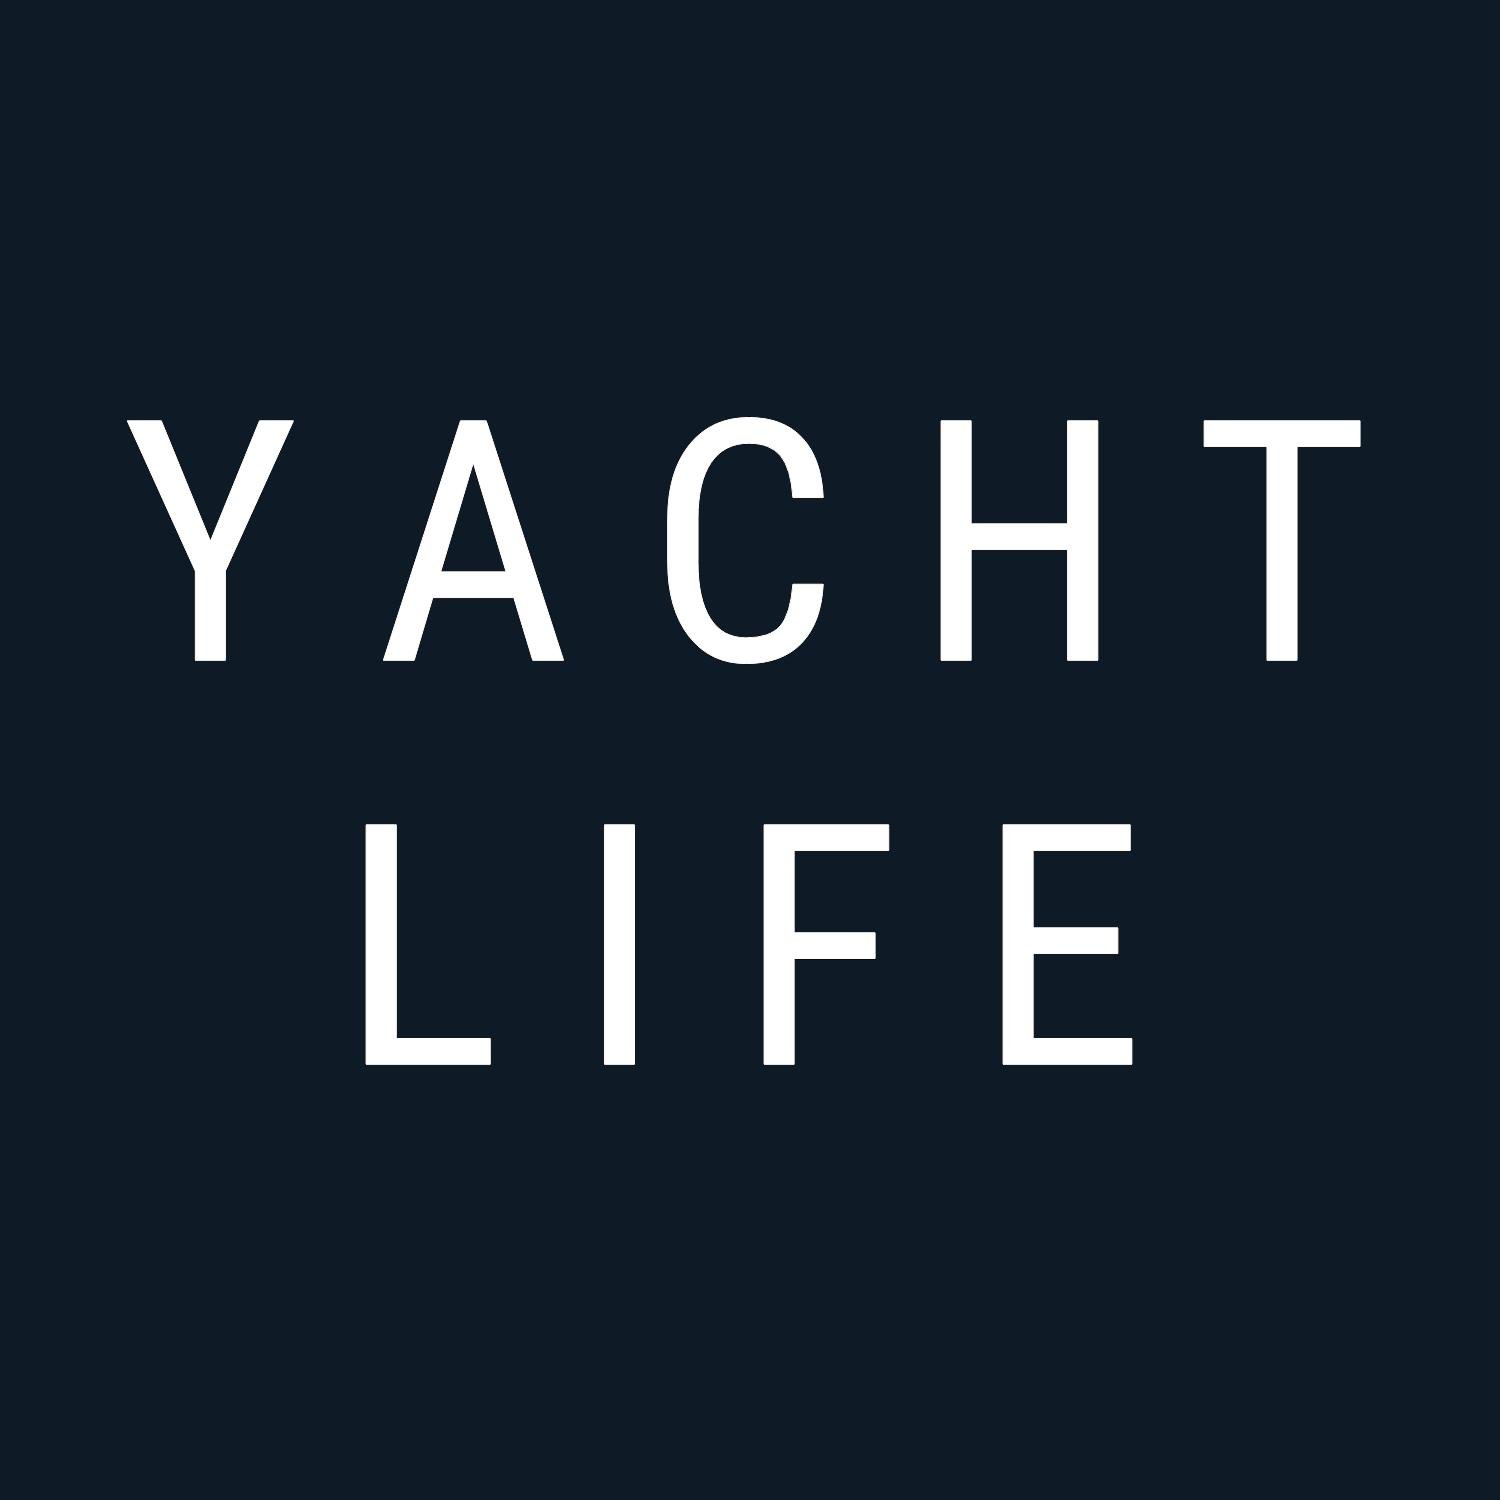 Yacht Life is a yacht brokerage firm. We hear the wishes of the clients to help them on the choice of them new yacht.